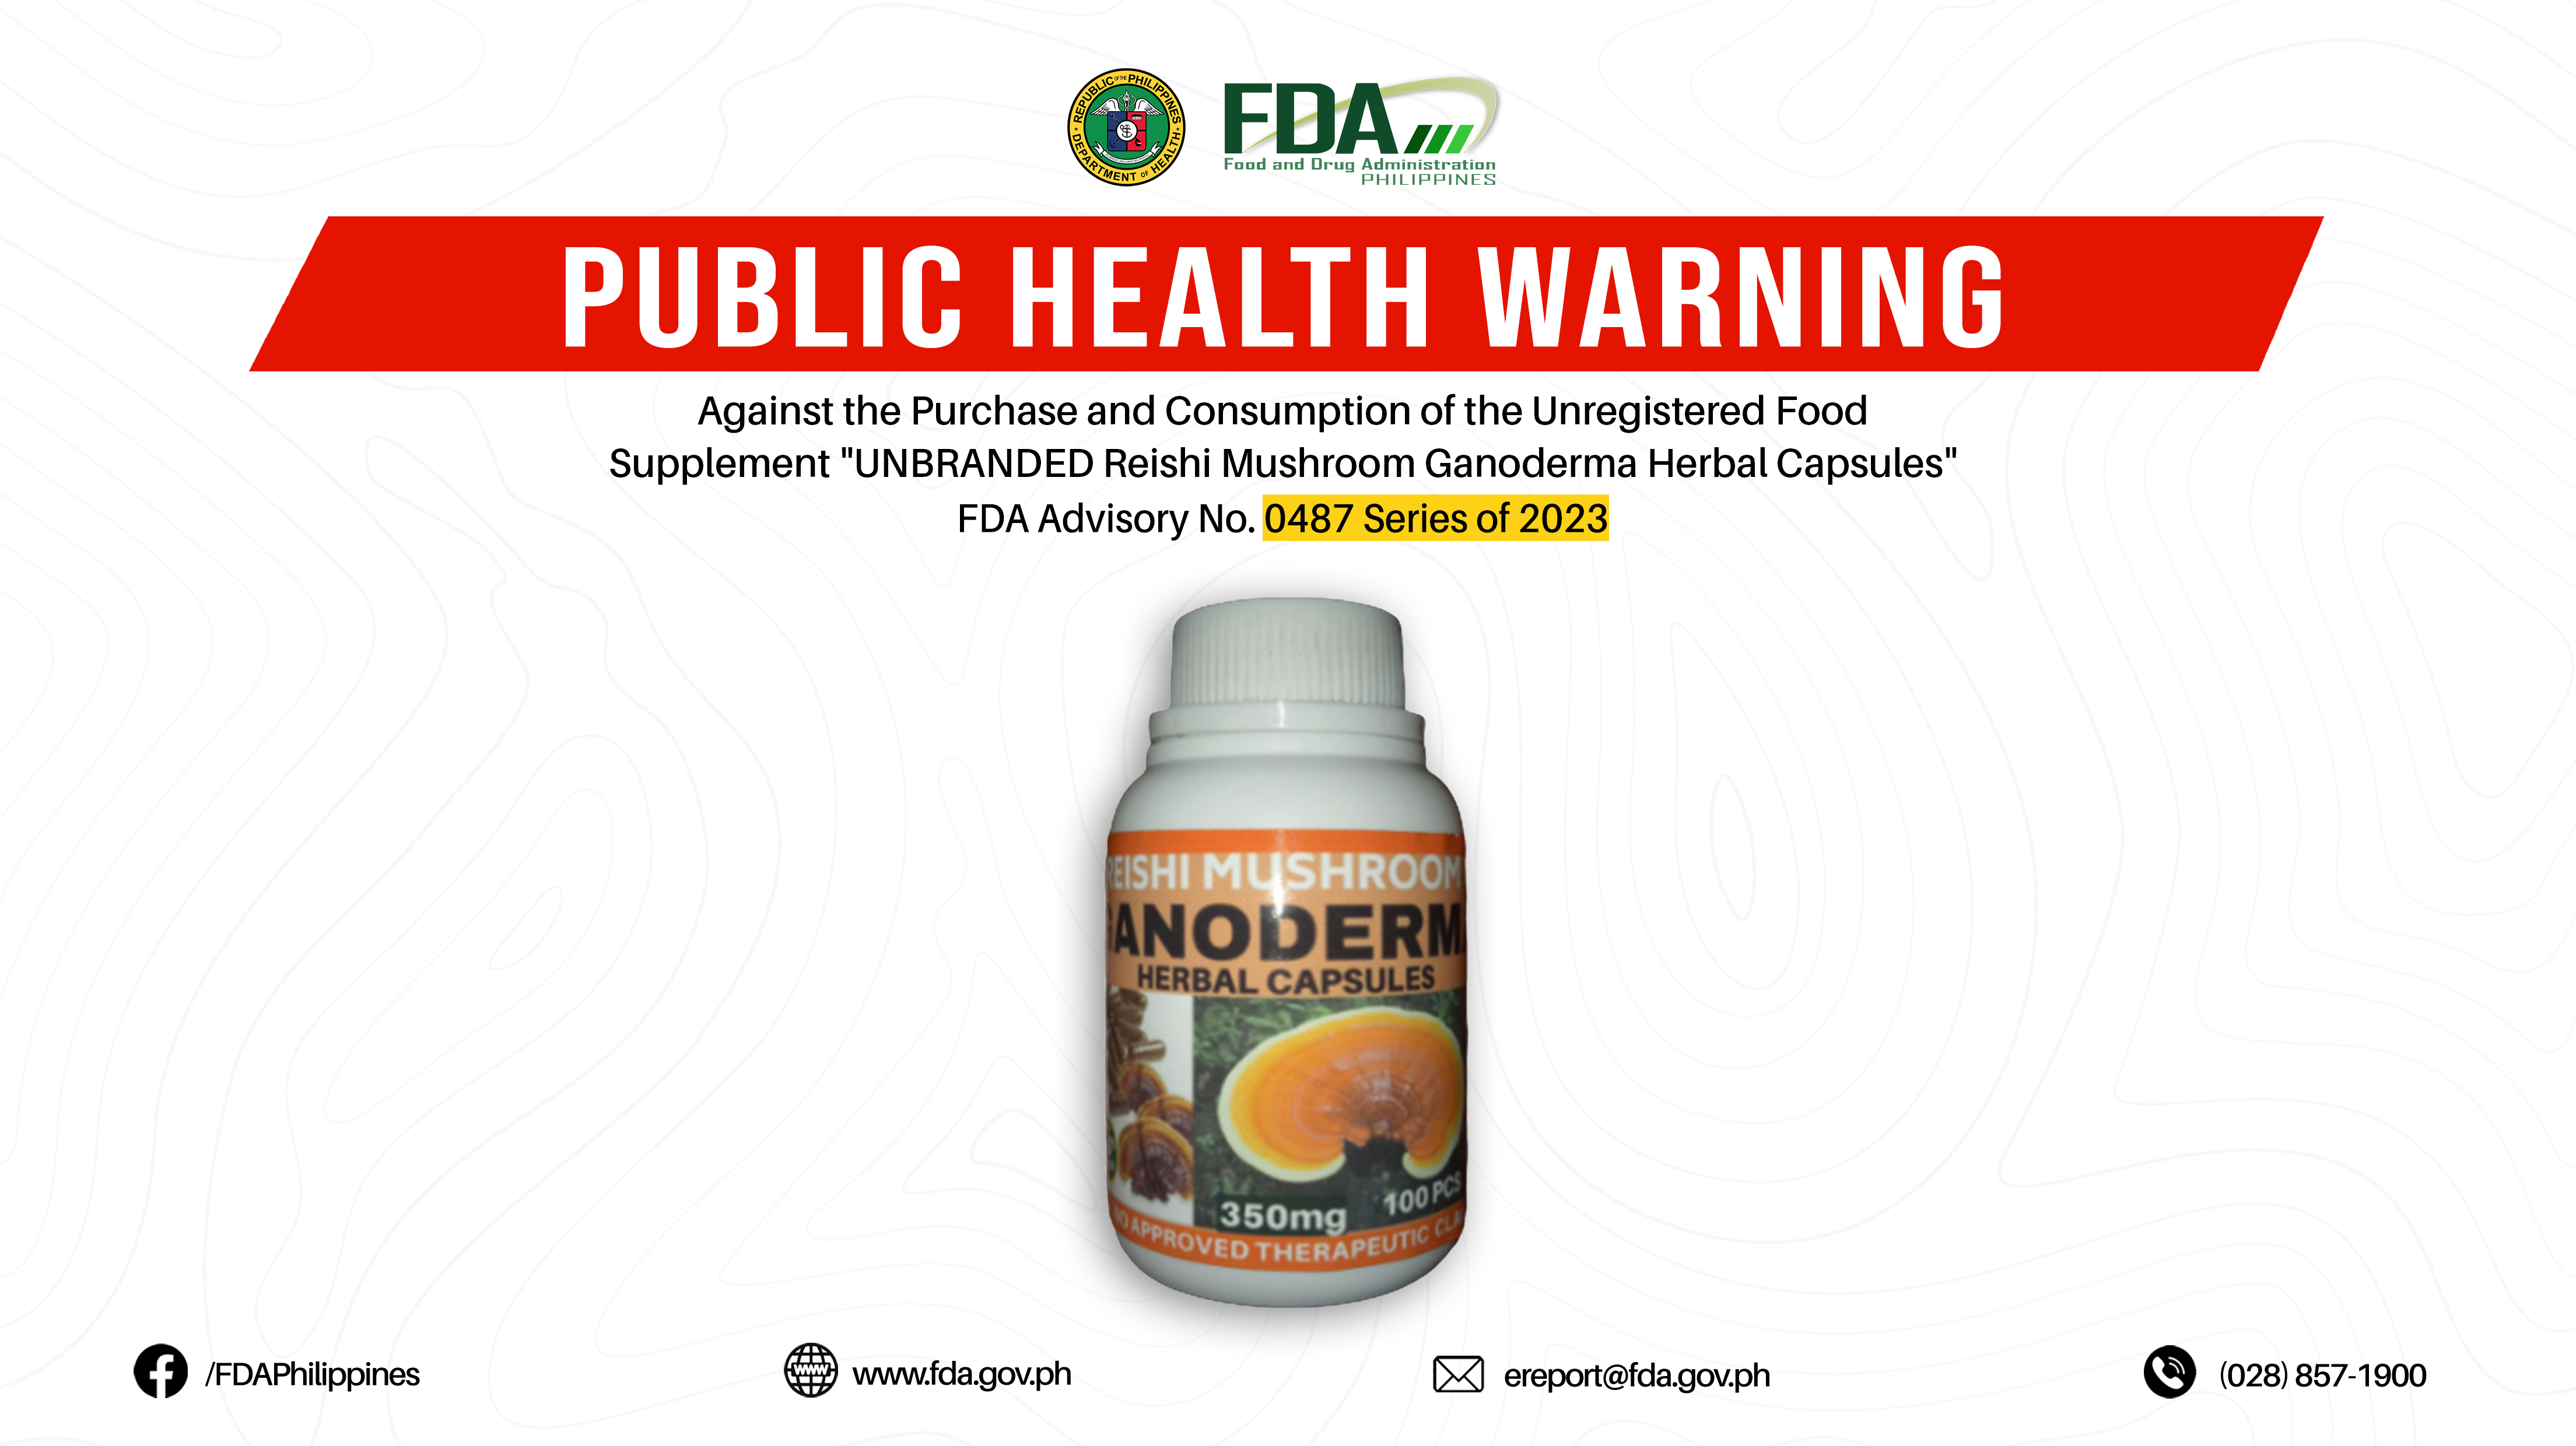 FDA Advisory No.2023-0487 || Public Health Warning Against the Purchase and Consumption of the Unregistered Food Supplement “UNBRANDED Reishi MushroomGanoderma Herbal Capsules”